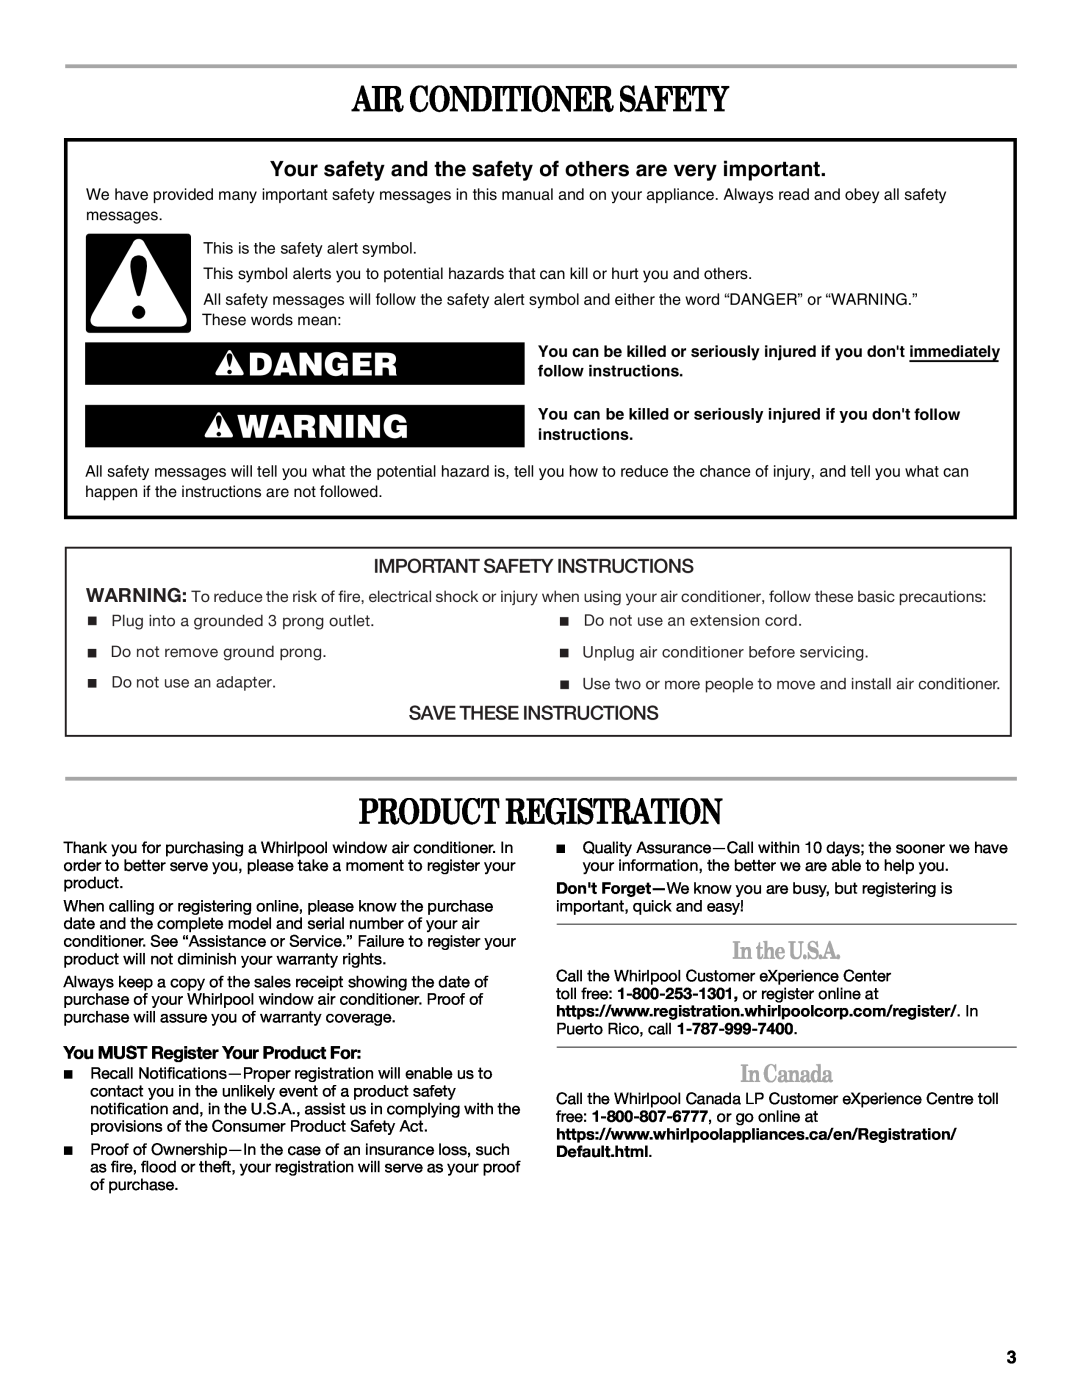 Whirlpool 66161279 Air Conditioner Safety, Product Registration, Danger, Inthe U.S.A, InCanada, Save These Instructions 